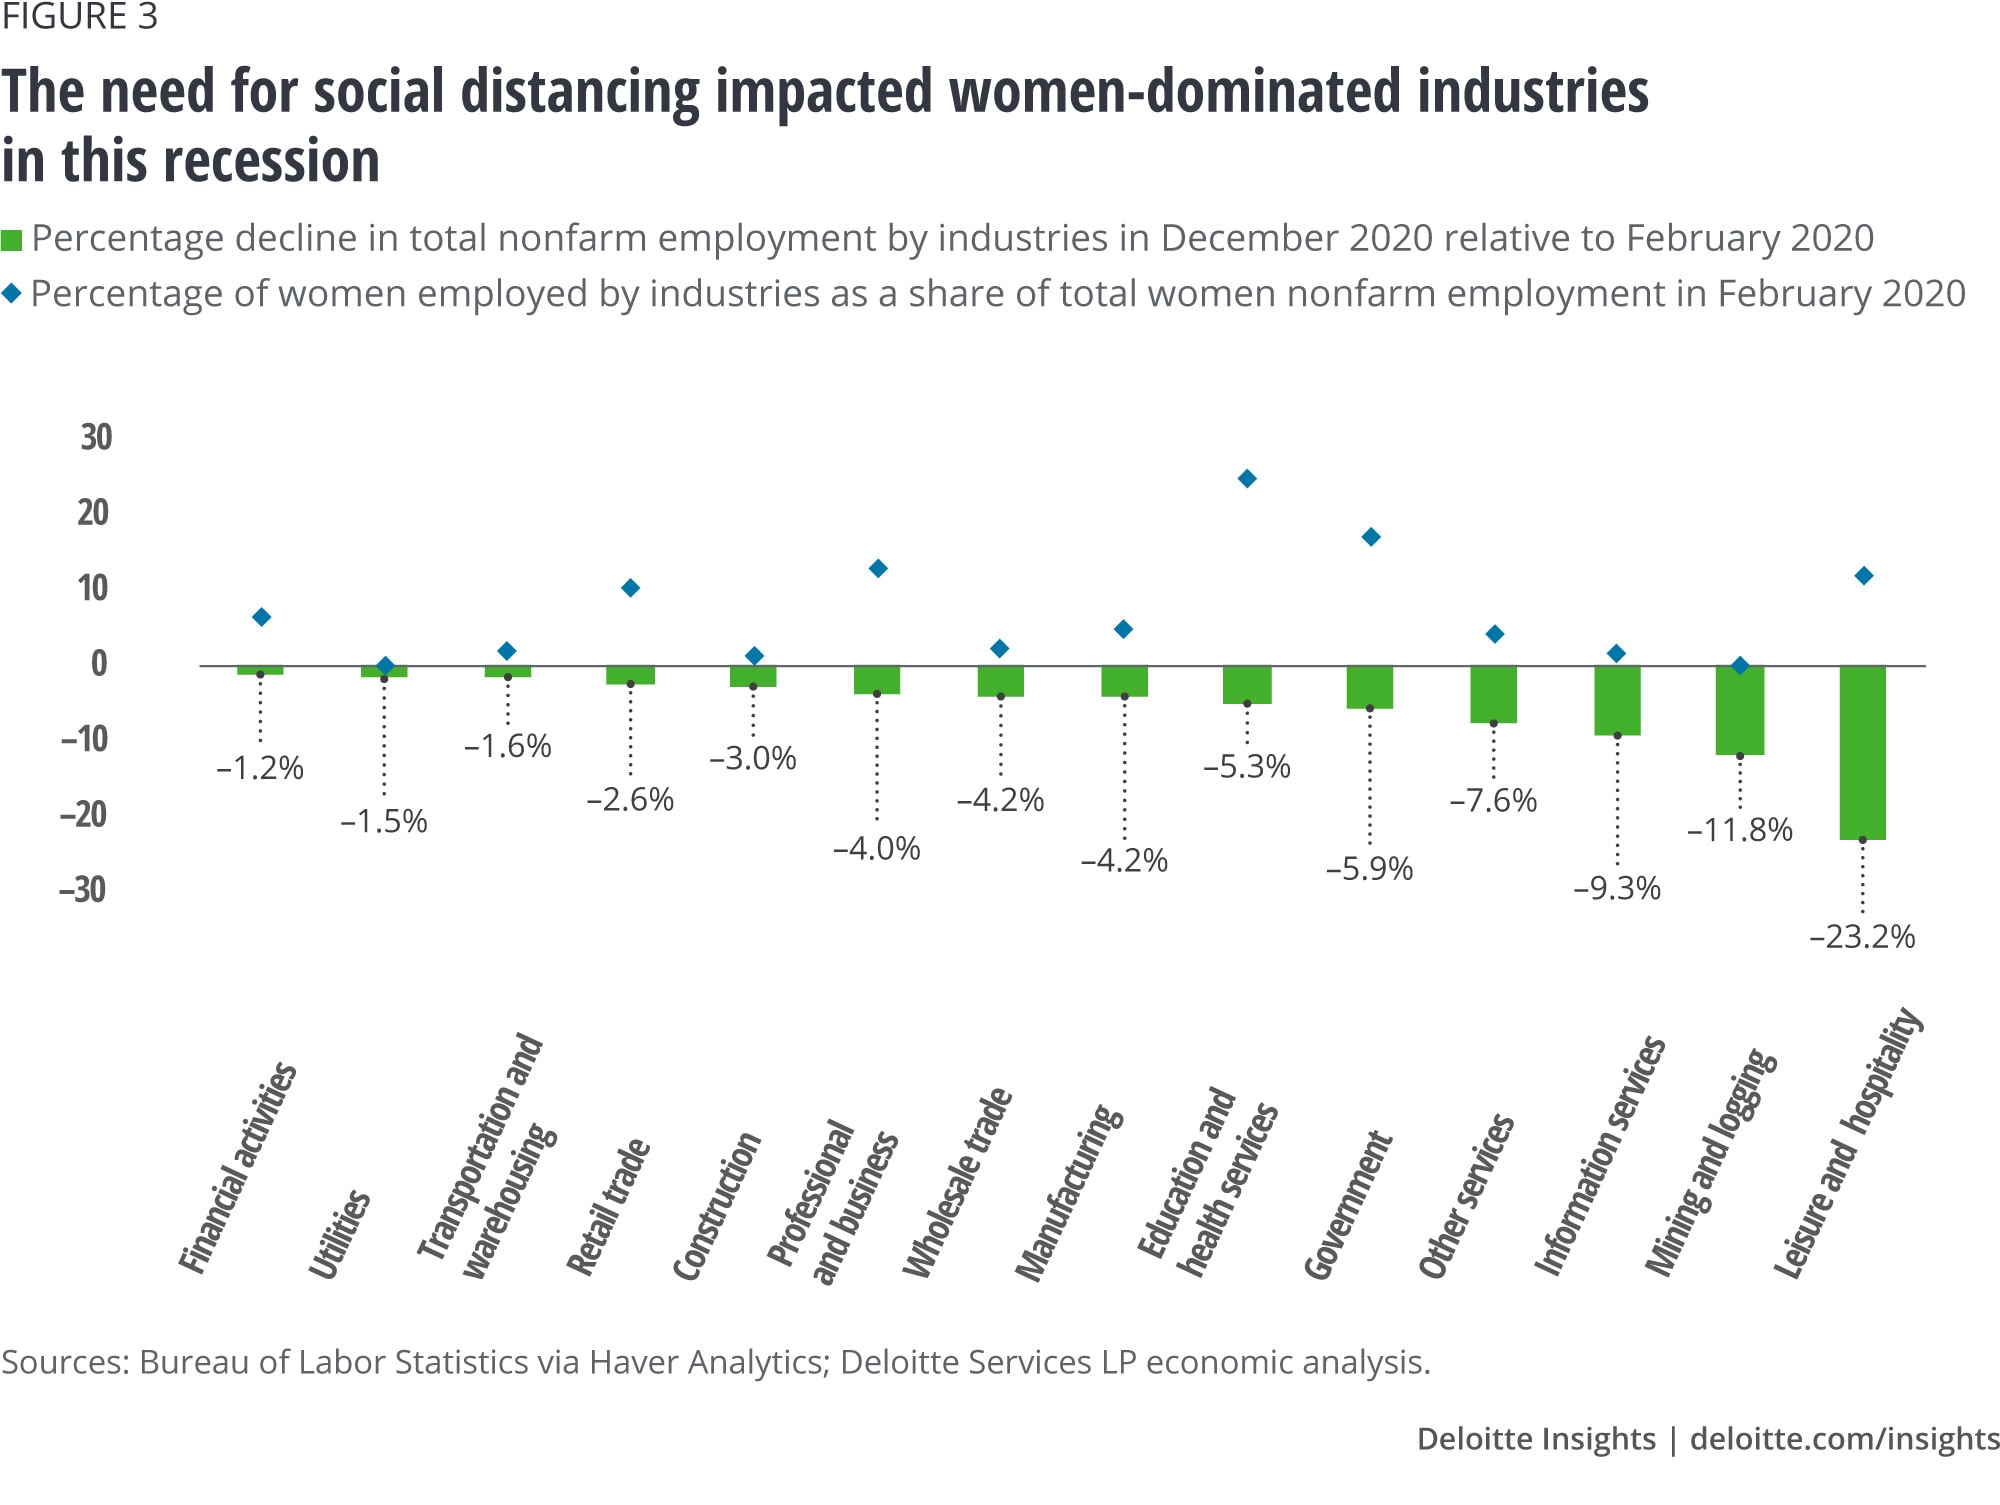 Figure 3. The need for social distancing impacted women-dominated industries in this recession 